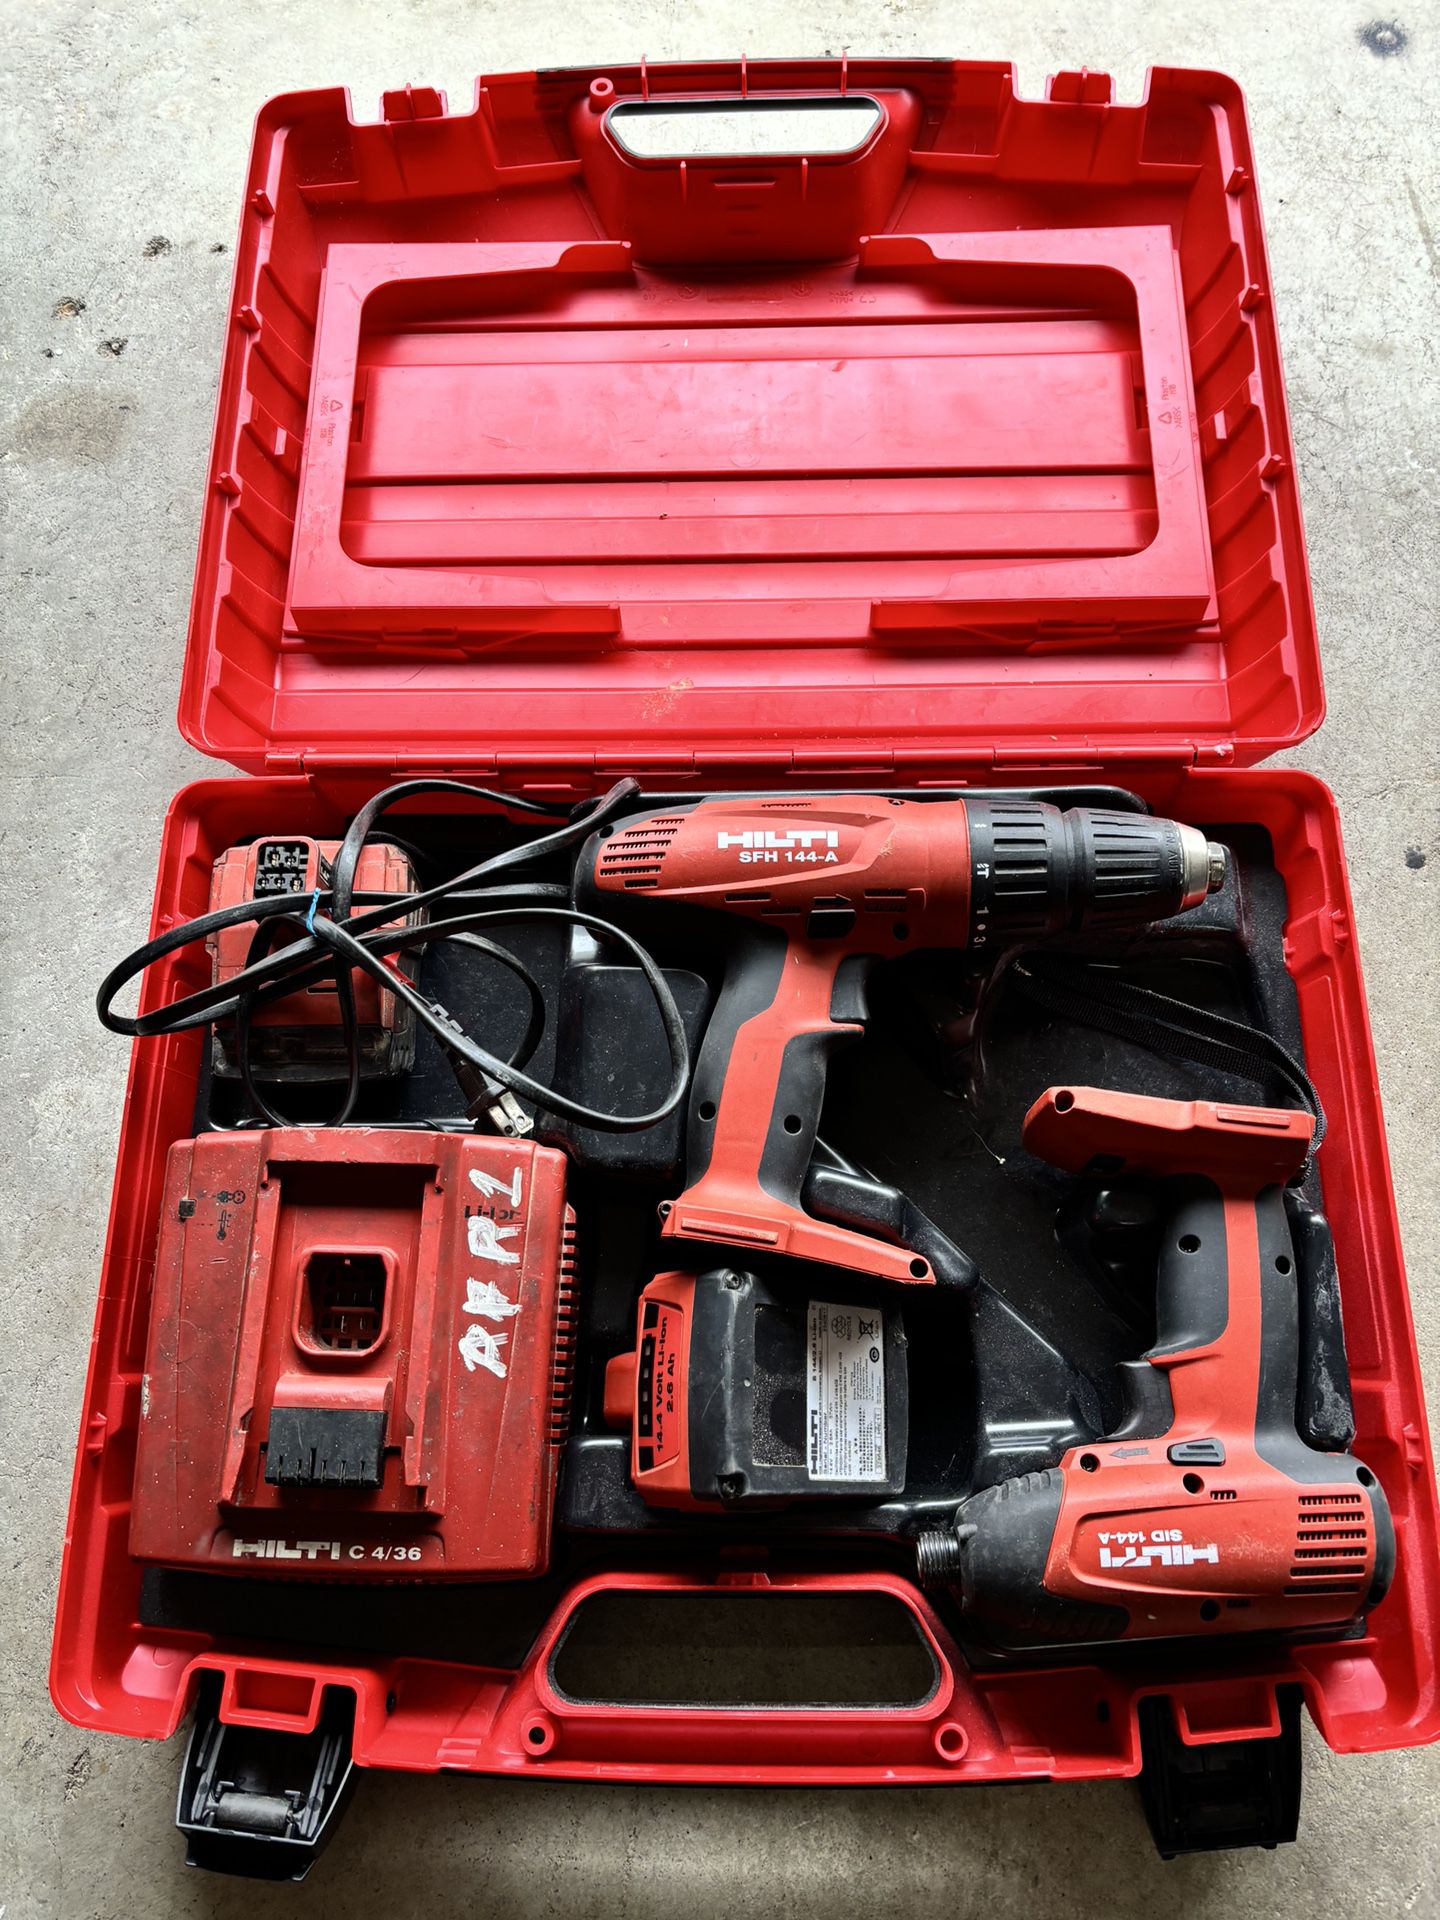 14.4 Volt Lithium-Ion Cordless Rotary Hammer Drill/Impact Driver Combo Kit (2-Tool)